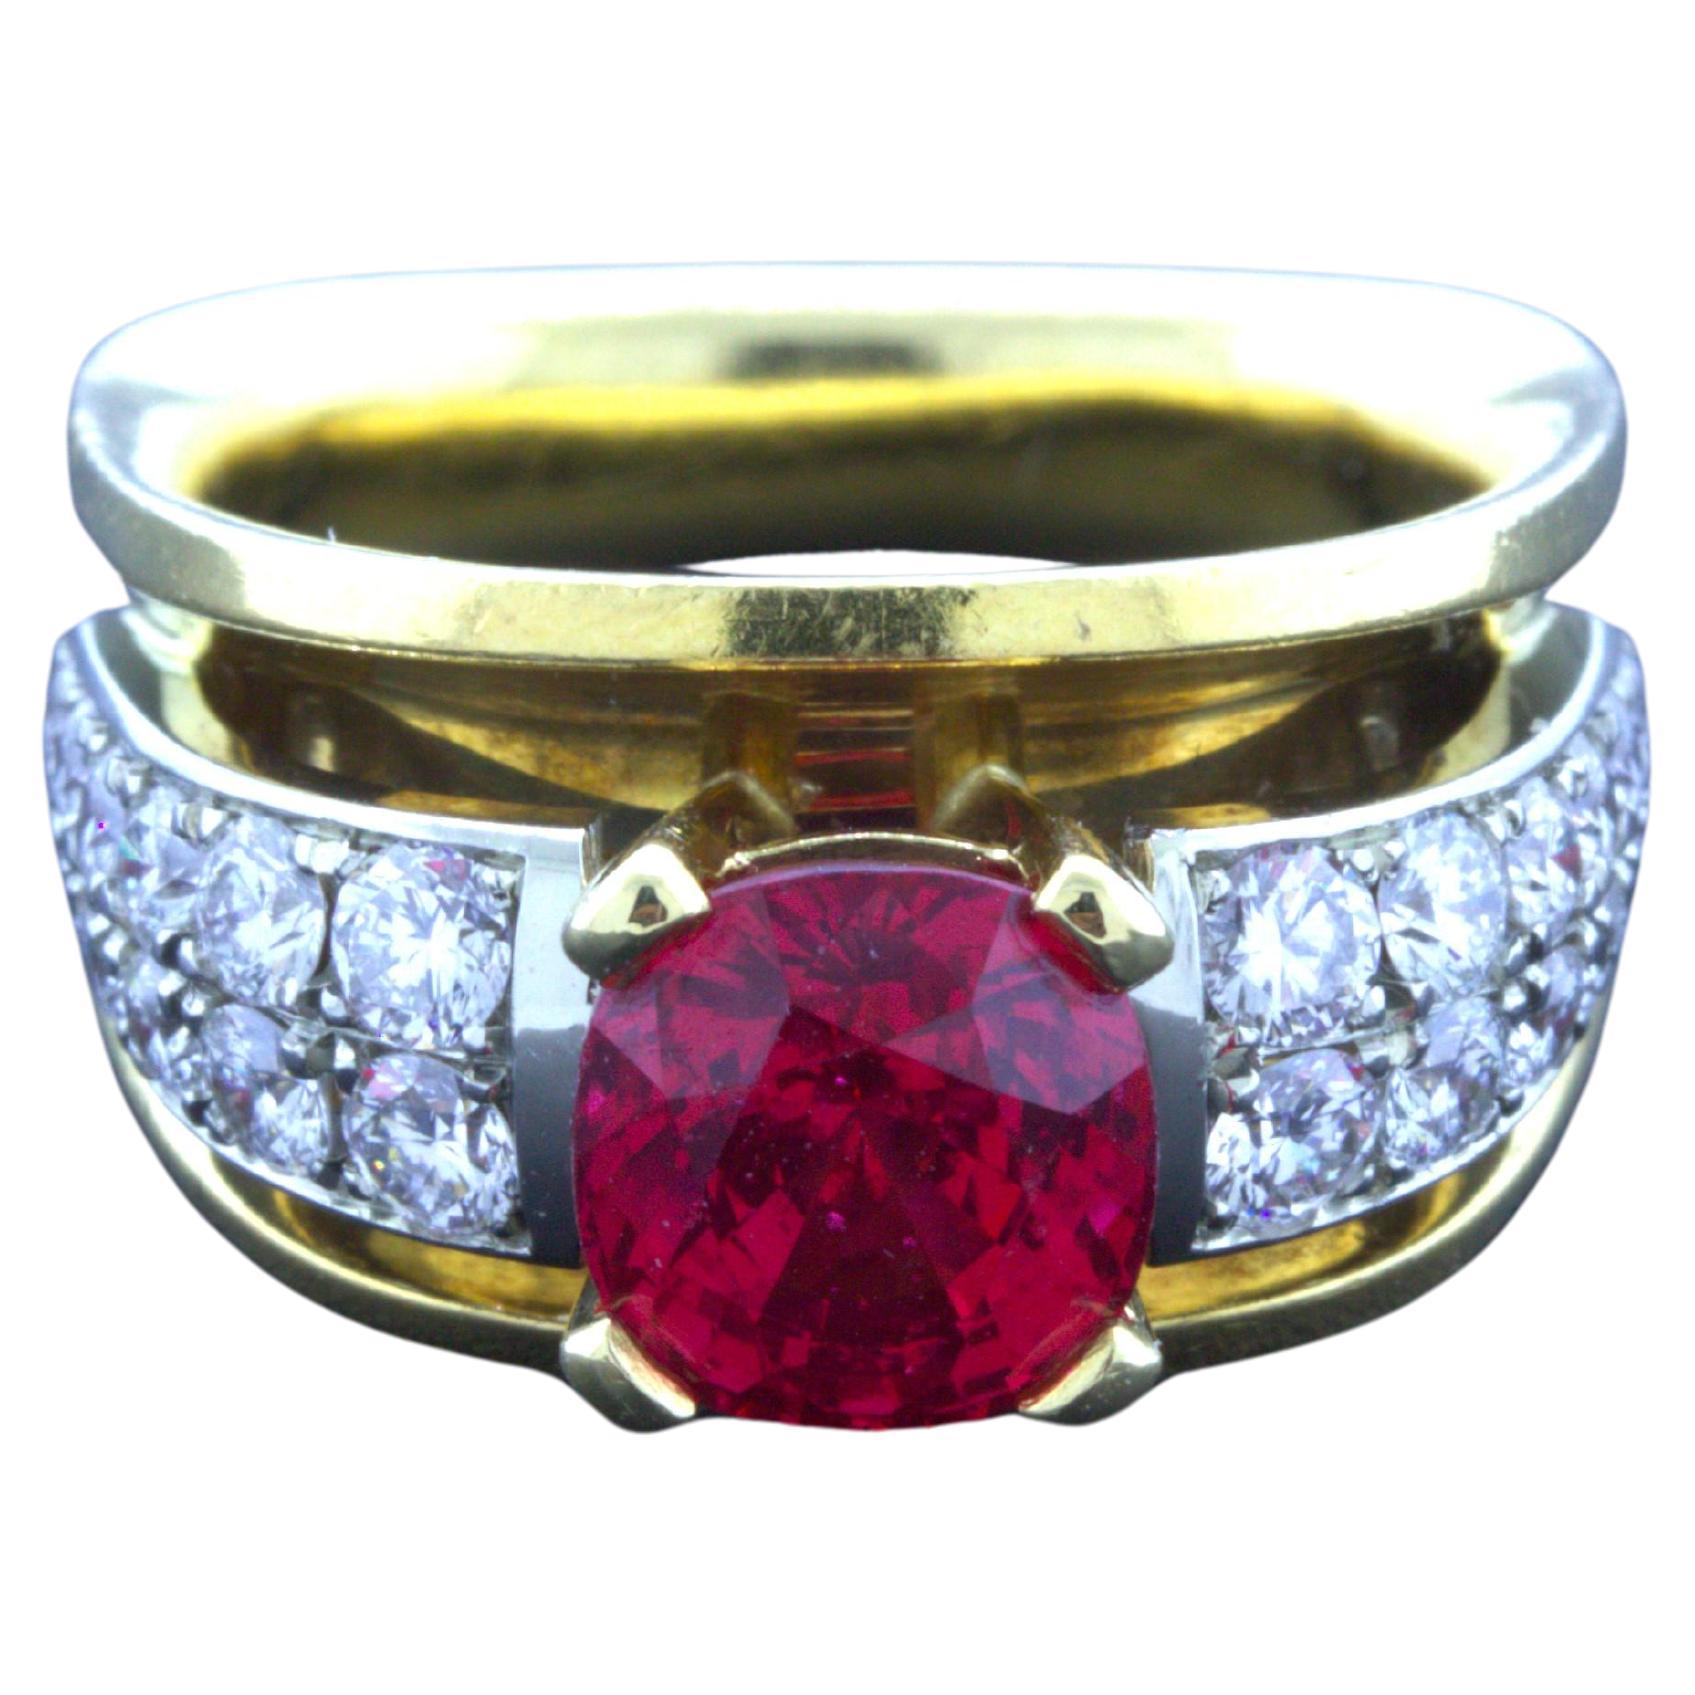 Exceptional 2.28 Carat Burmese Red Spinel Diamond 18K Yellow Gold Ring, GIA Cert